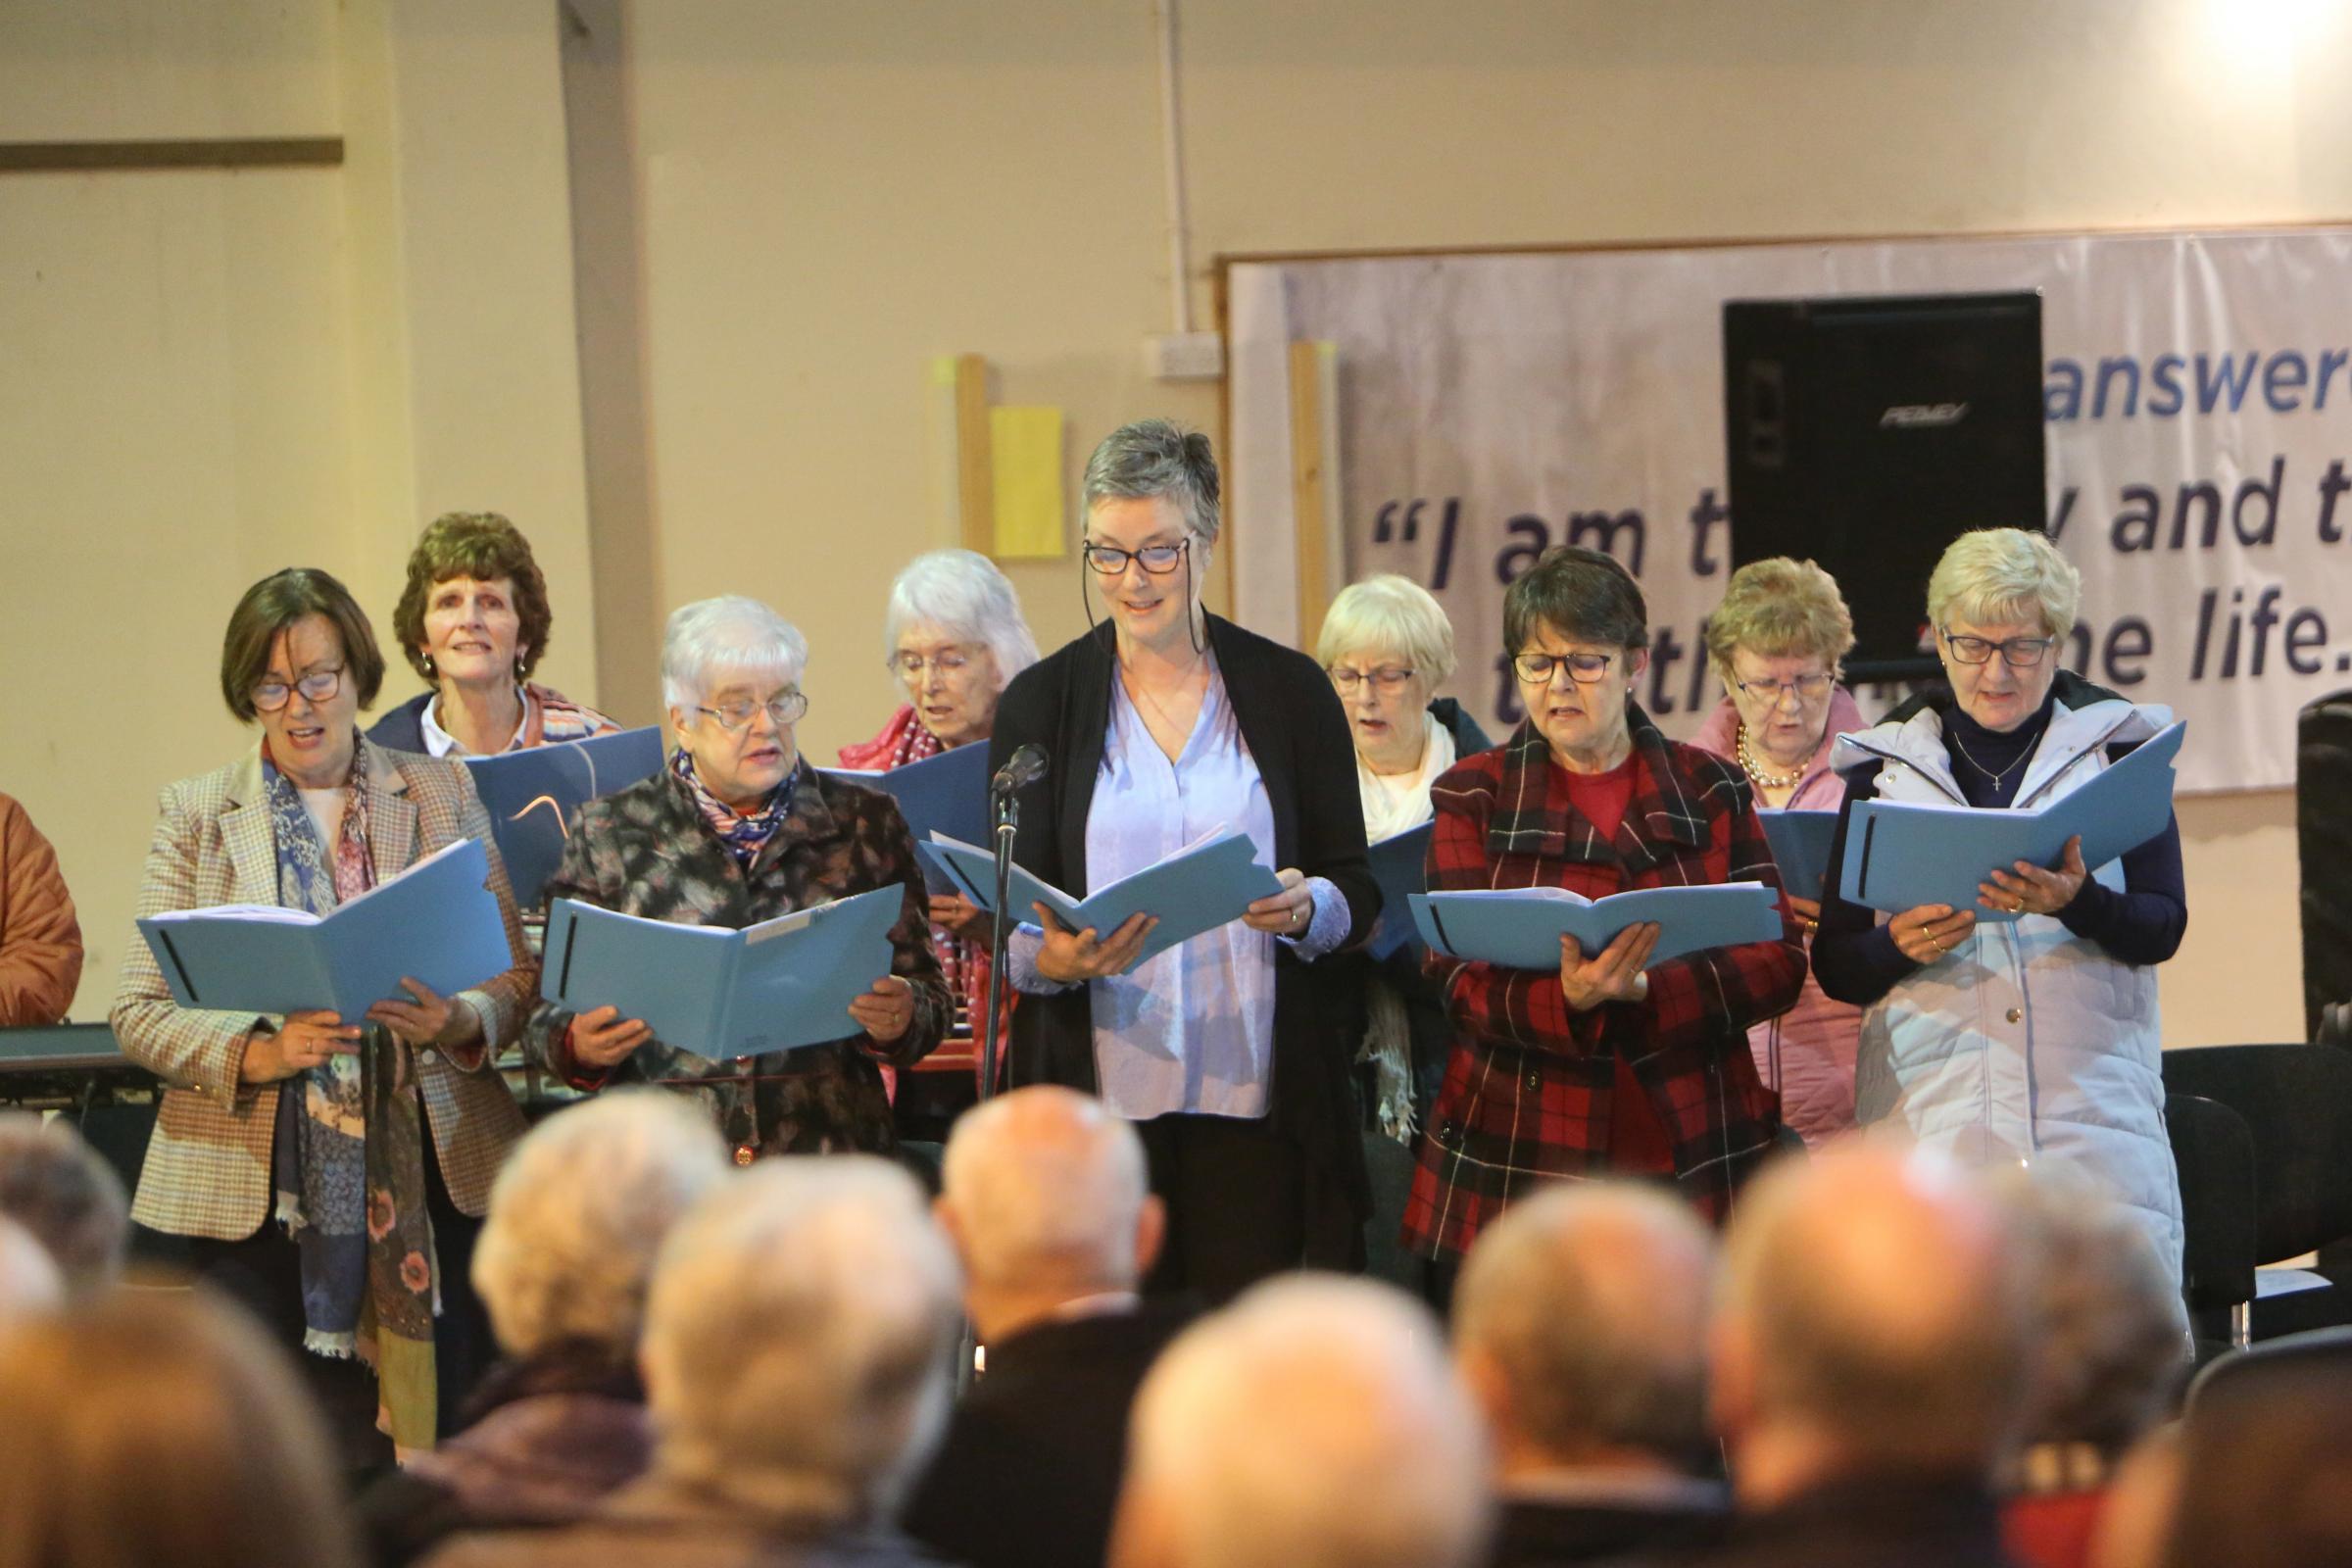 The North Western Region of MWI Choir were joined by Olive Rowe, President, Methodist Women of Ireland (third from left) at the Harvest Service.